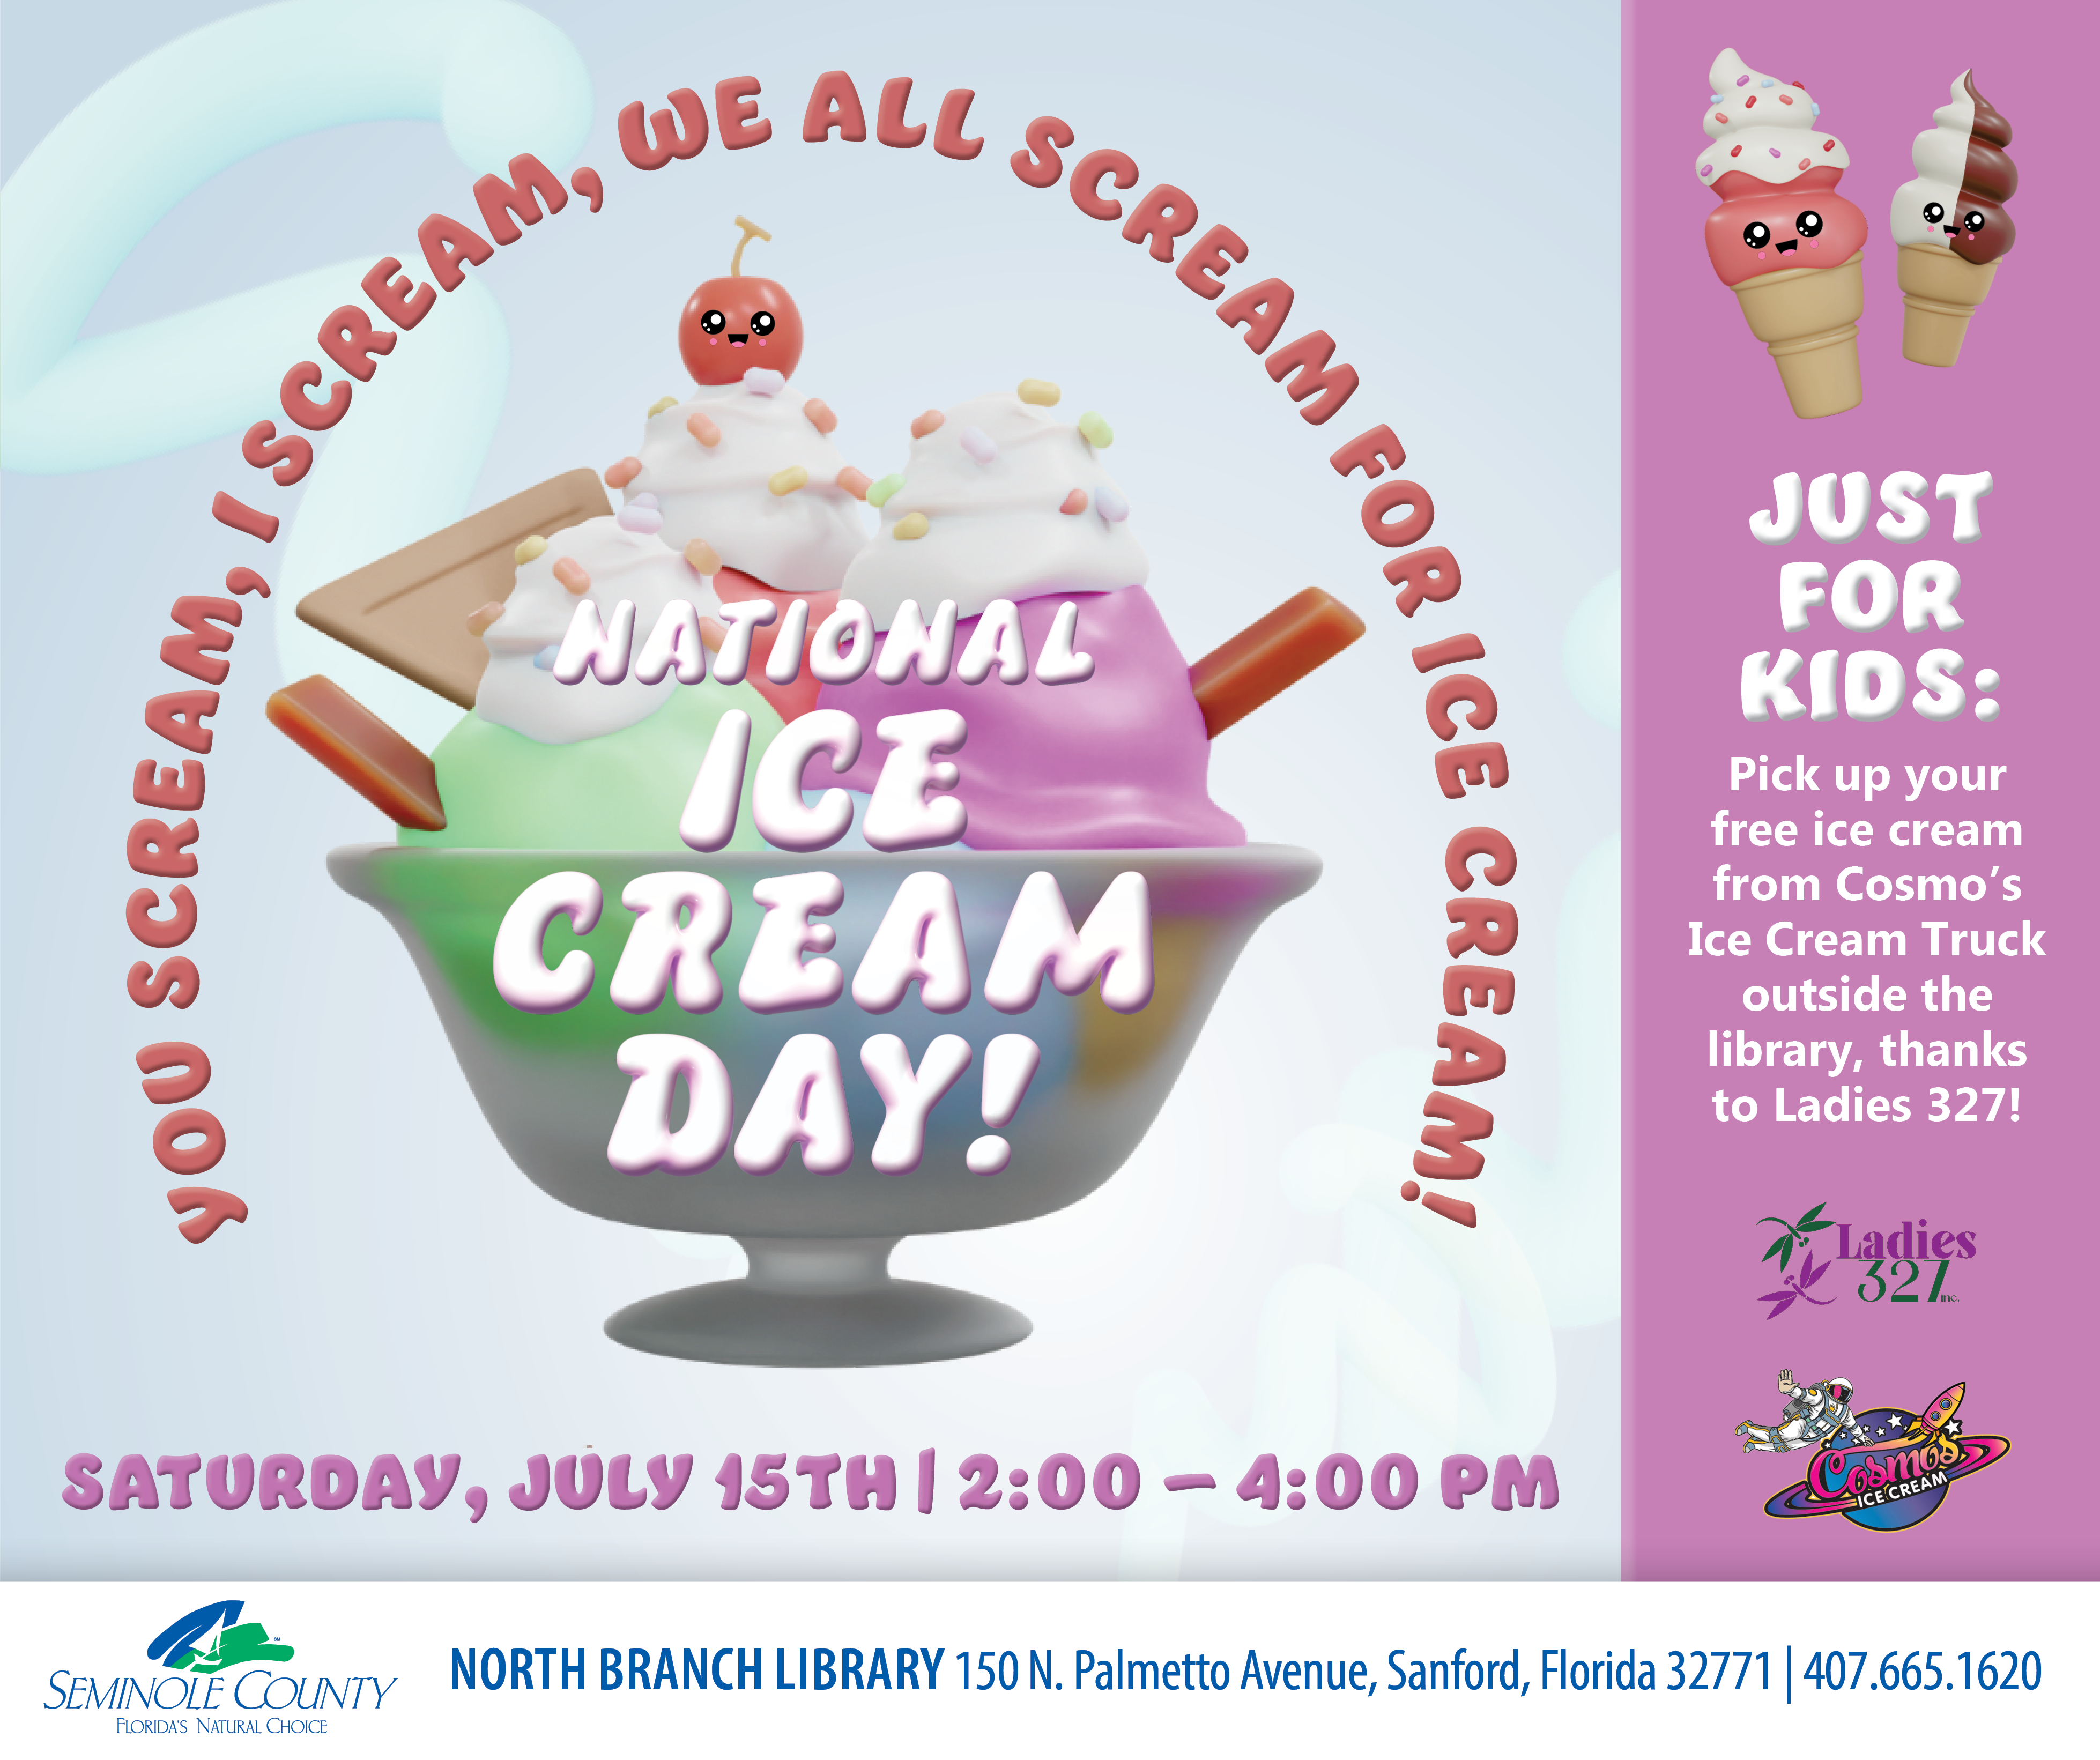 I scream, you screamwe ALL scream for ICE CREAM! Join us on Saturday, 9/2  from 11am-4pm for our Ice Cream Social & FREE Bike Wash! Come…